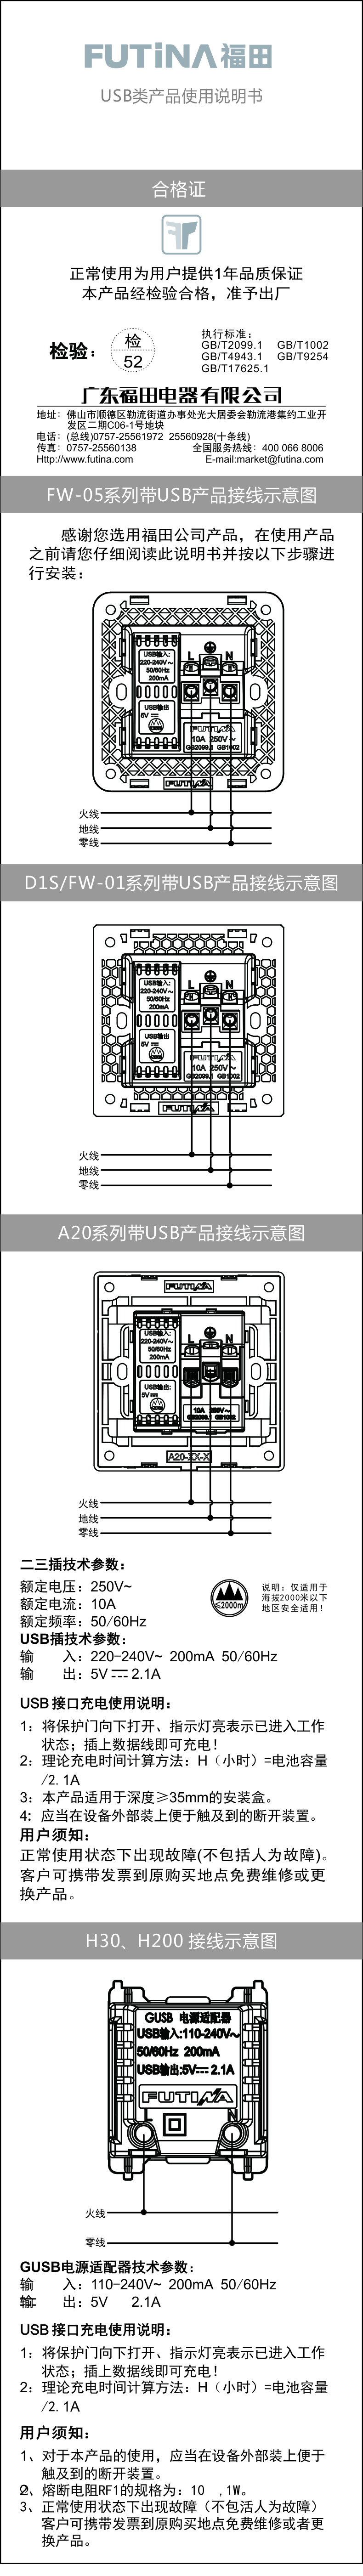 General Instructions for USB Products